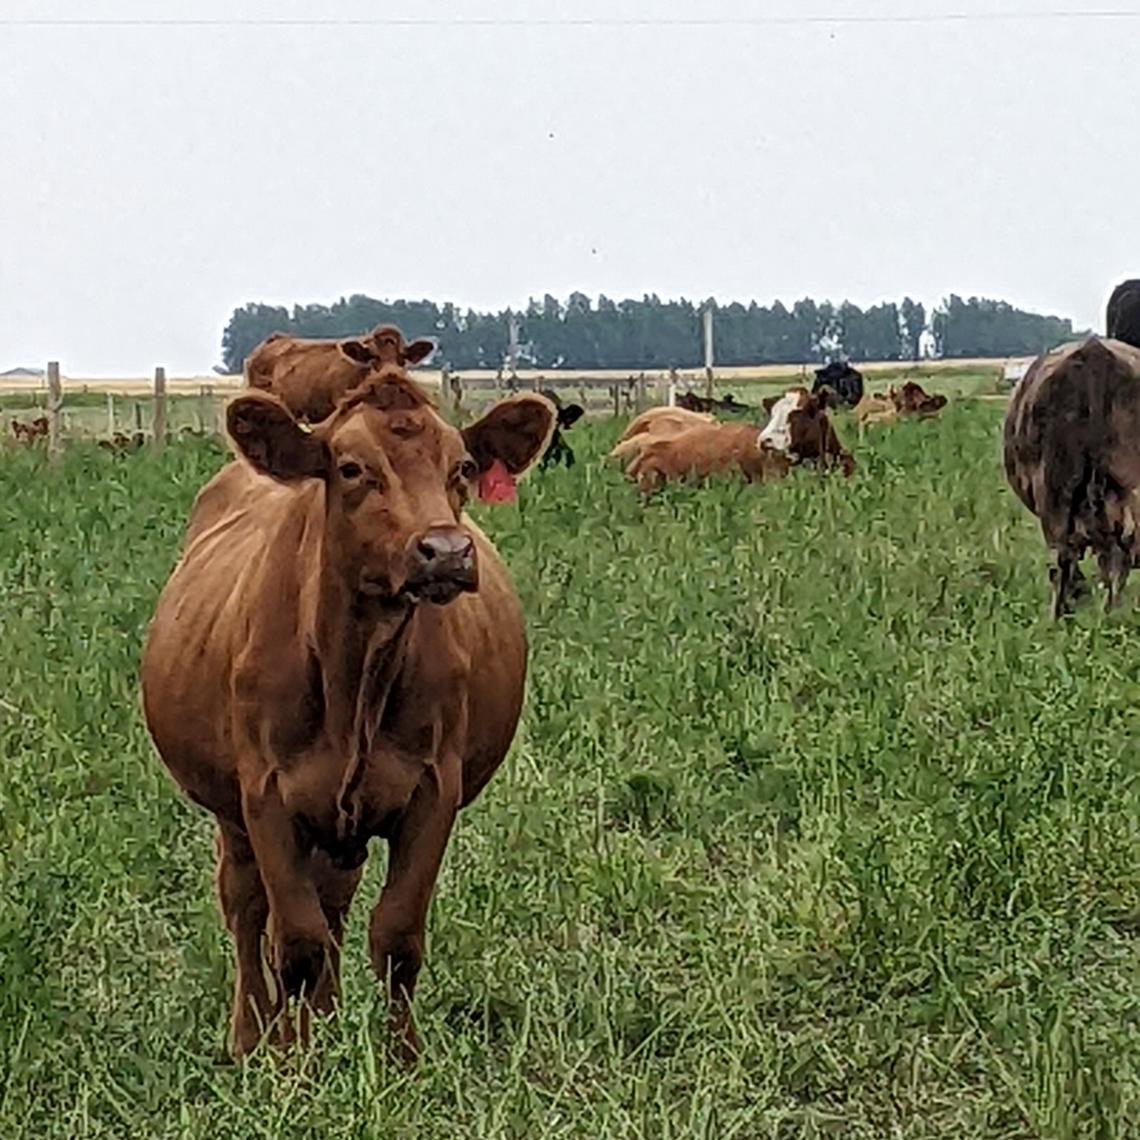 Brown cow in green field with other cows on overcast day